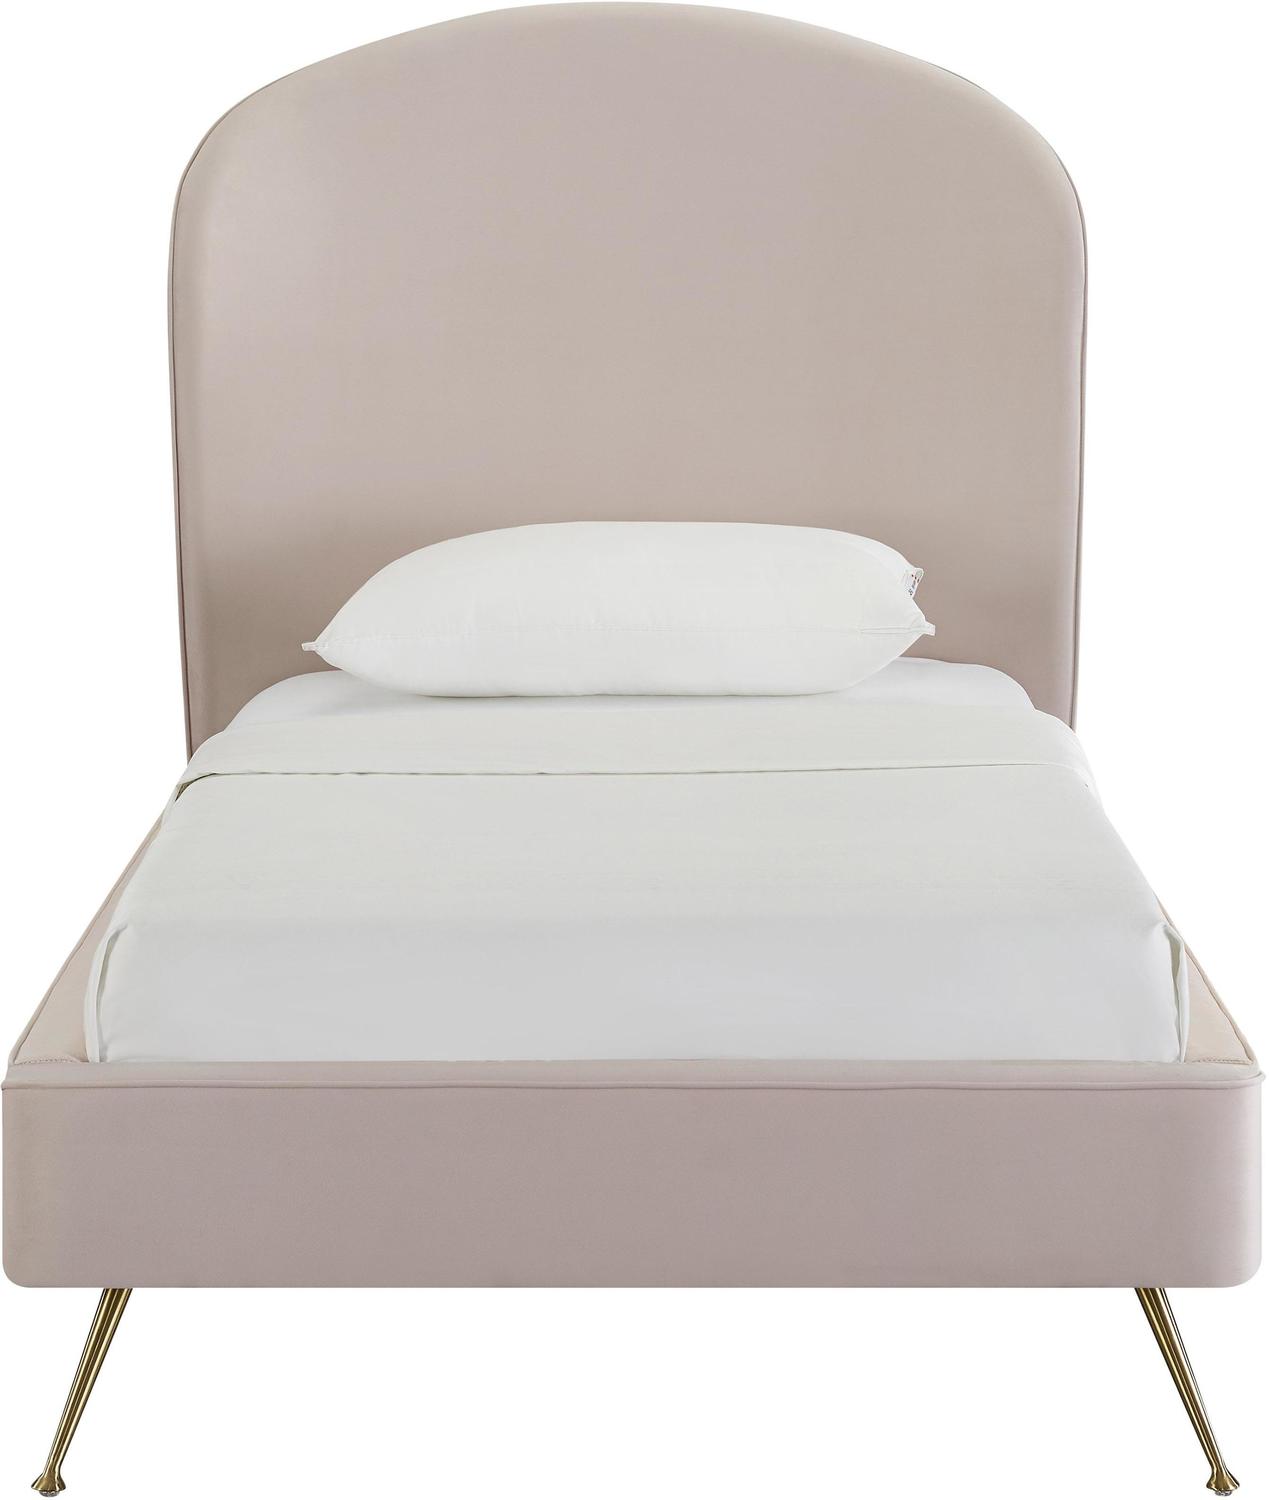 bed board double Tov Furniture Beds Blush